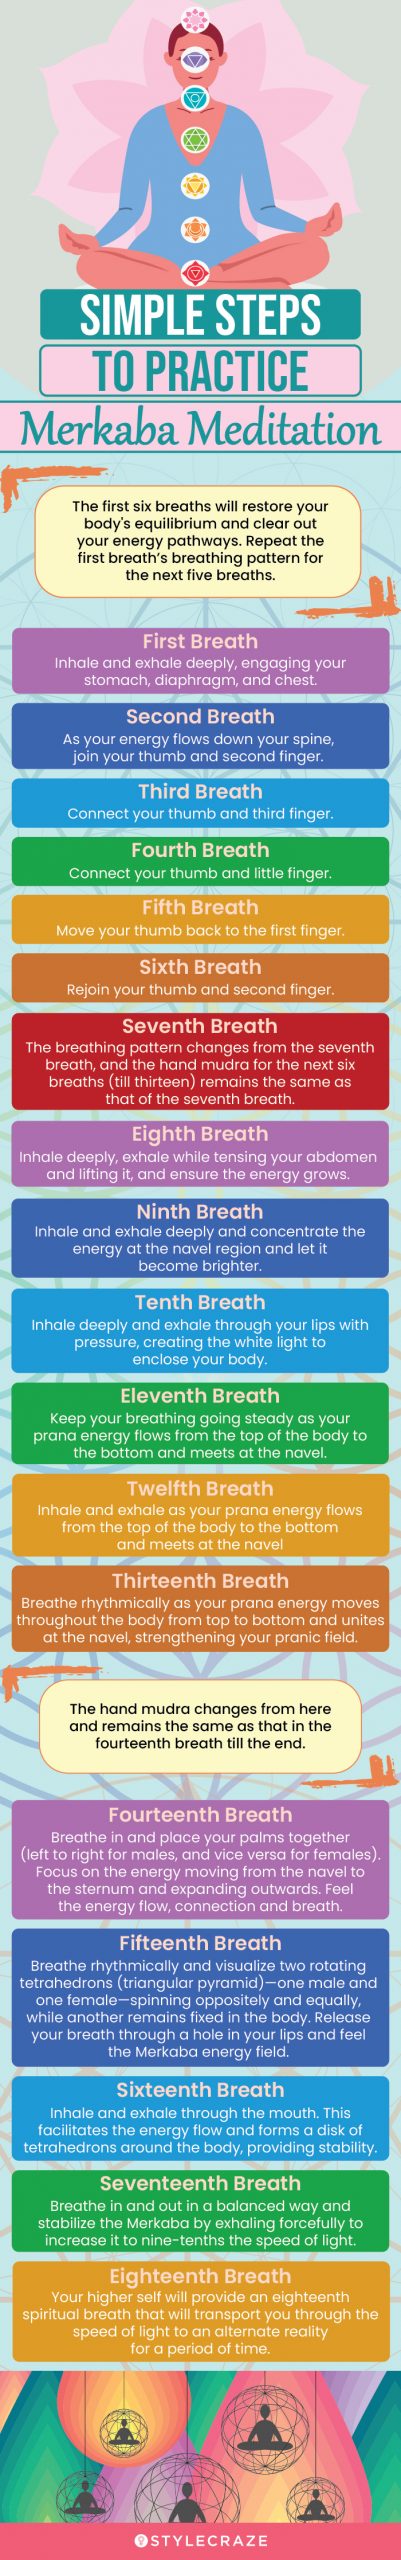 simple steps to practice merkaba meditation (infographic)